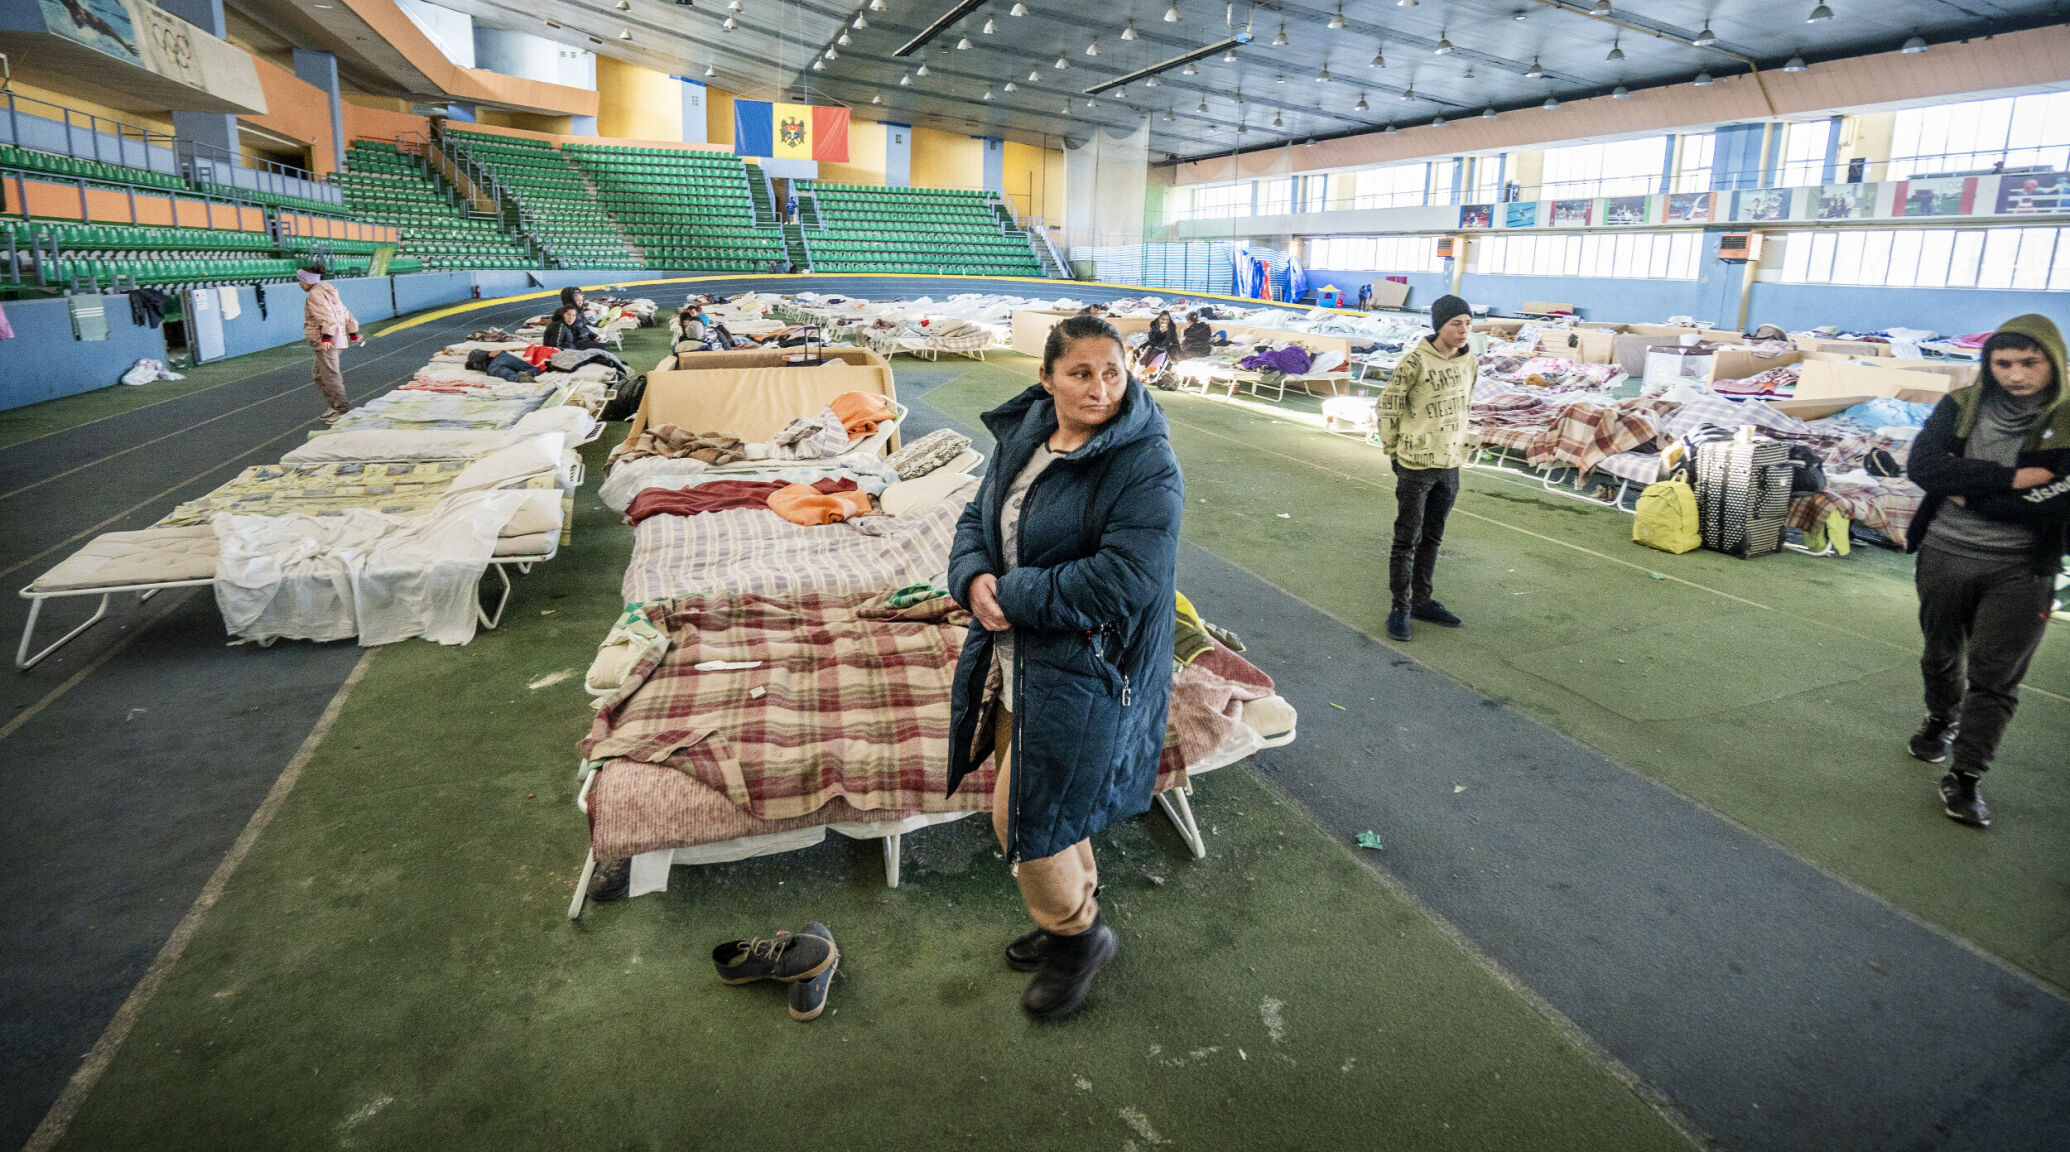 20220317 CHISNIAU This center in Chesnia, the capital of Moldova, is intended for refugees from Ukraine of non-Ukrainian origin.  There are mostly rooms here.  Zhanna Mirzojieva is a refugee from Odessa Oblast.  Pictures from the reception.  Photo: Hans Arne Vedlog / Dagbladet